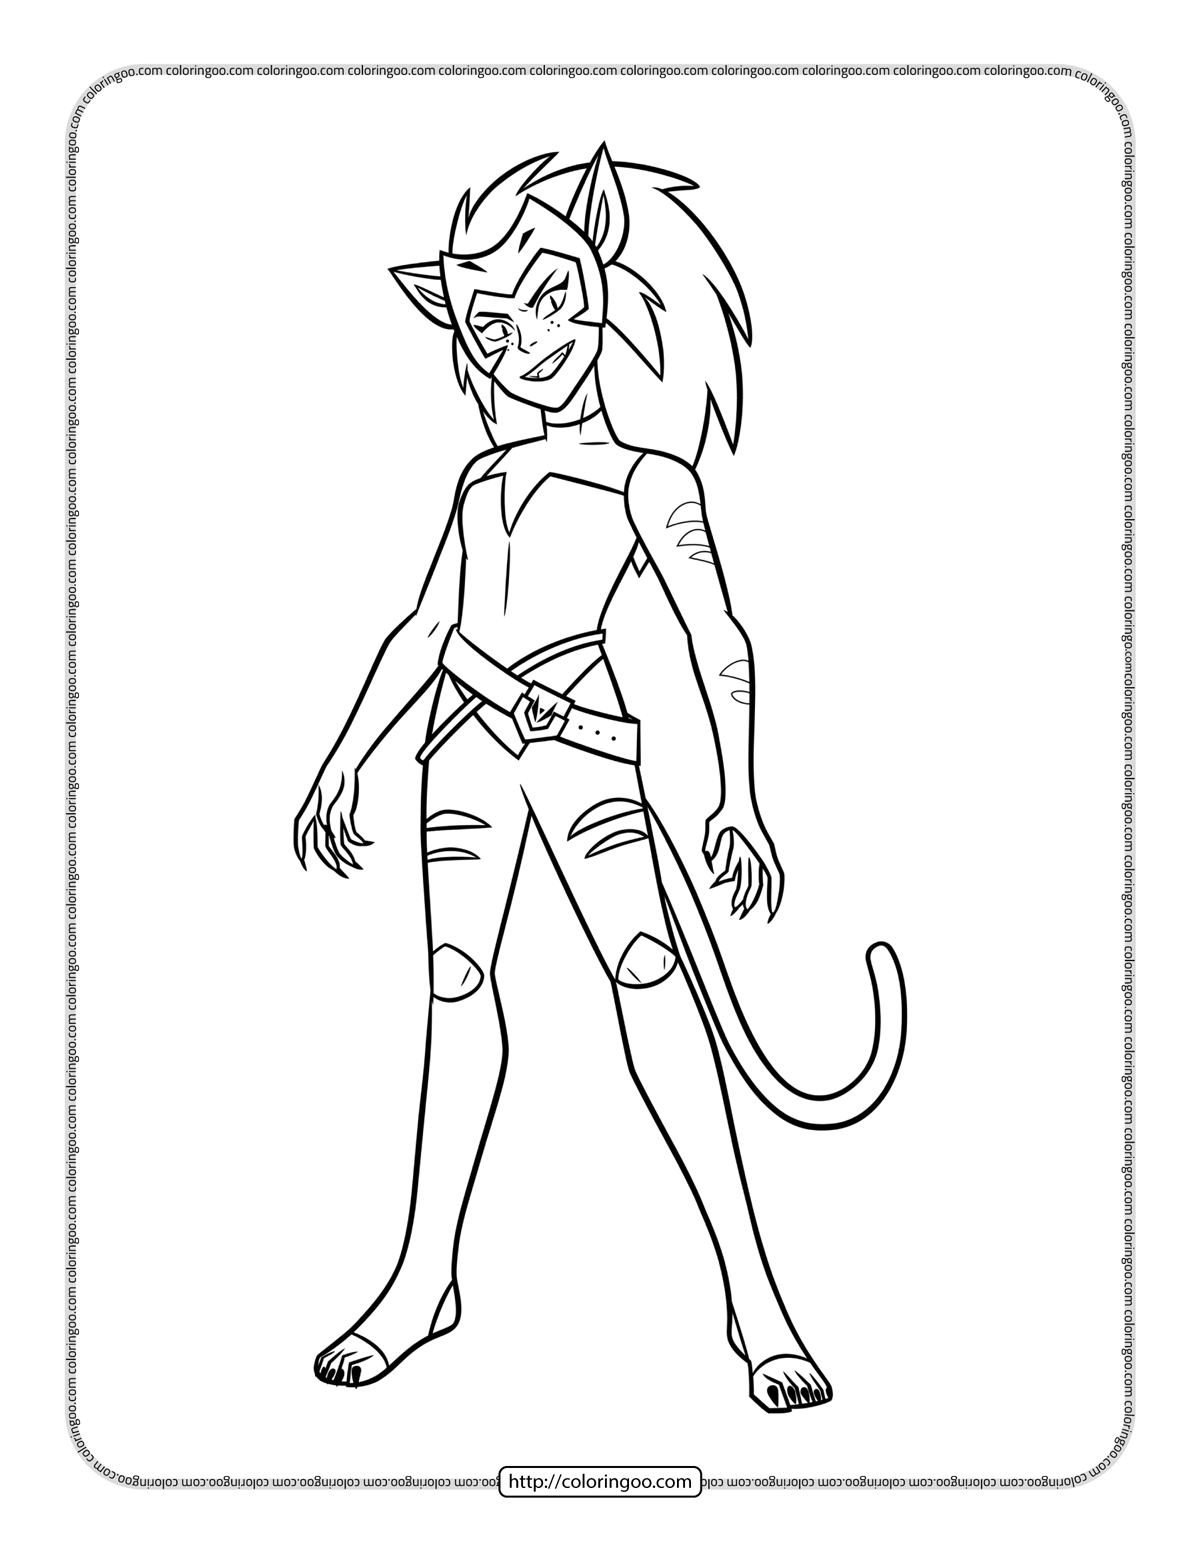 Catra She-Ra and The Princesses of Power Coloring Page